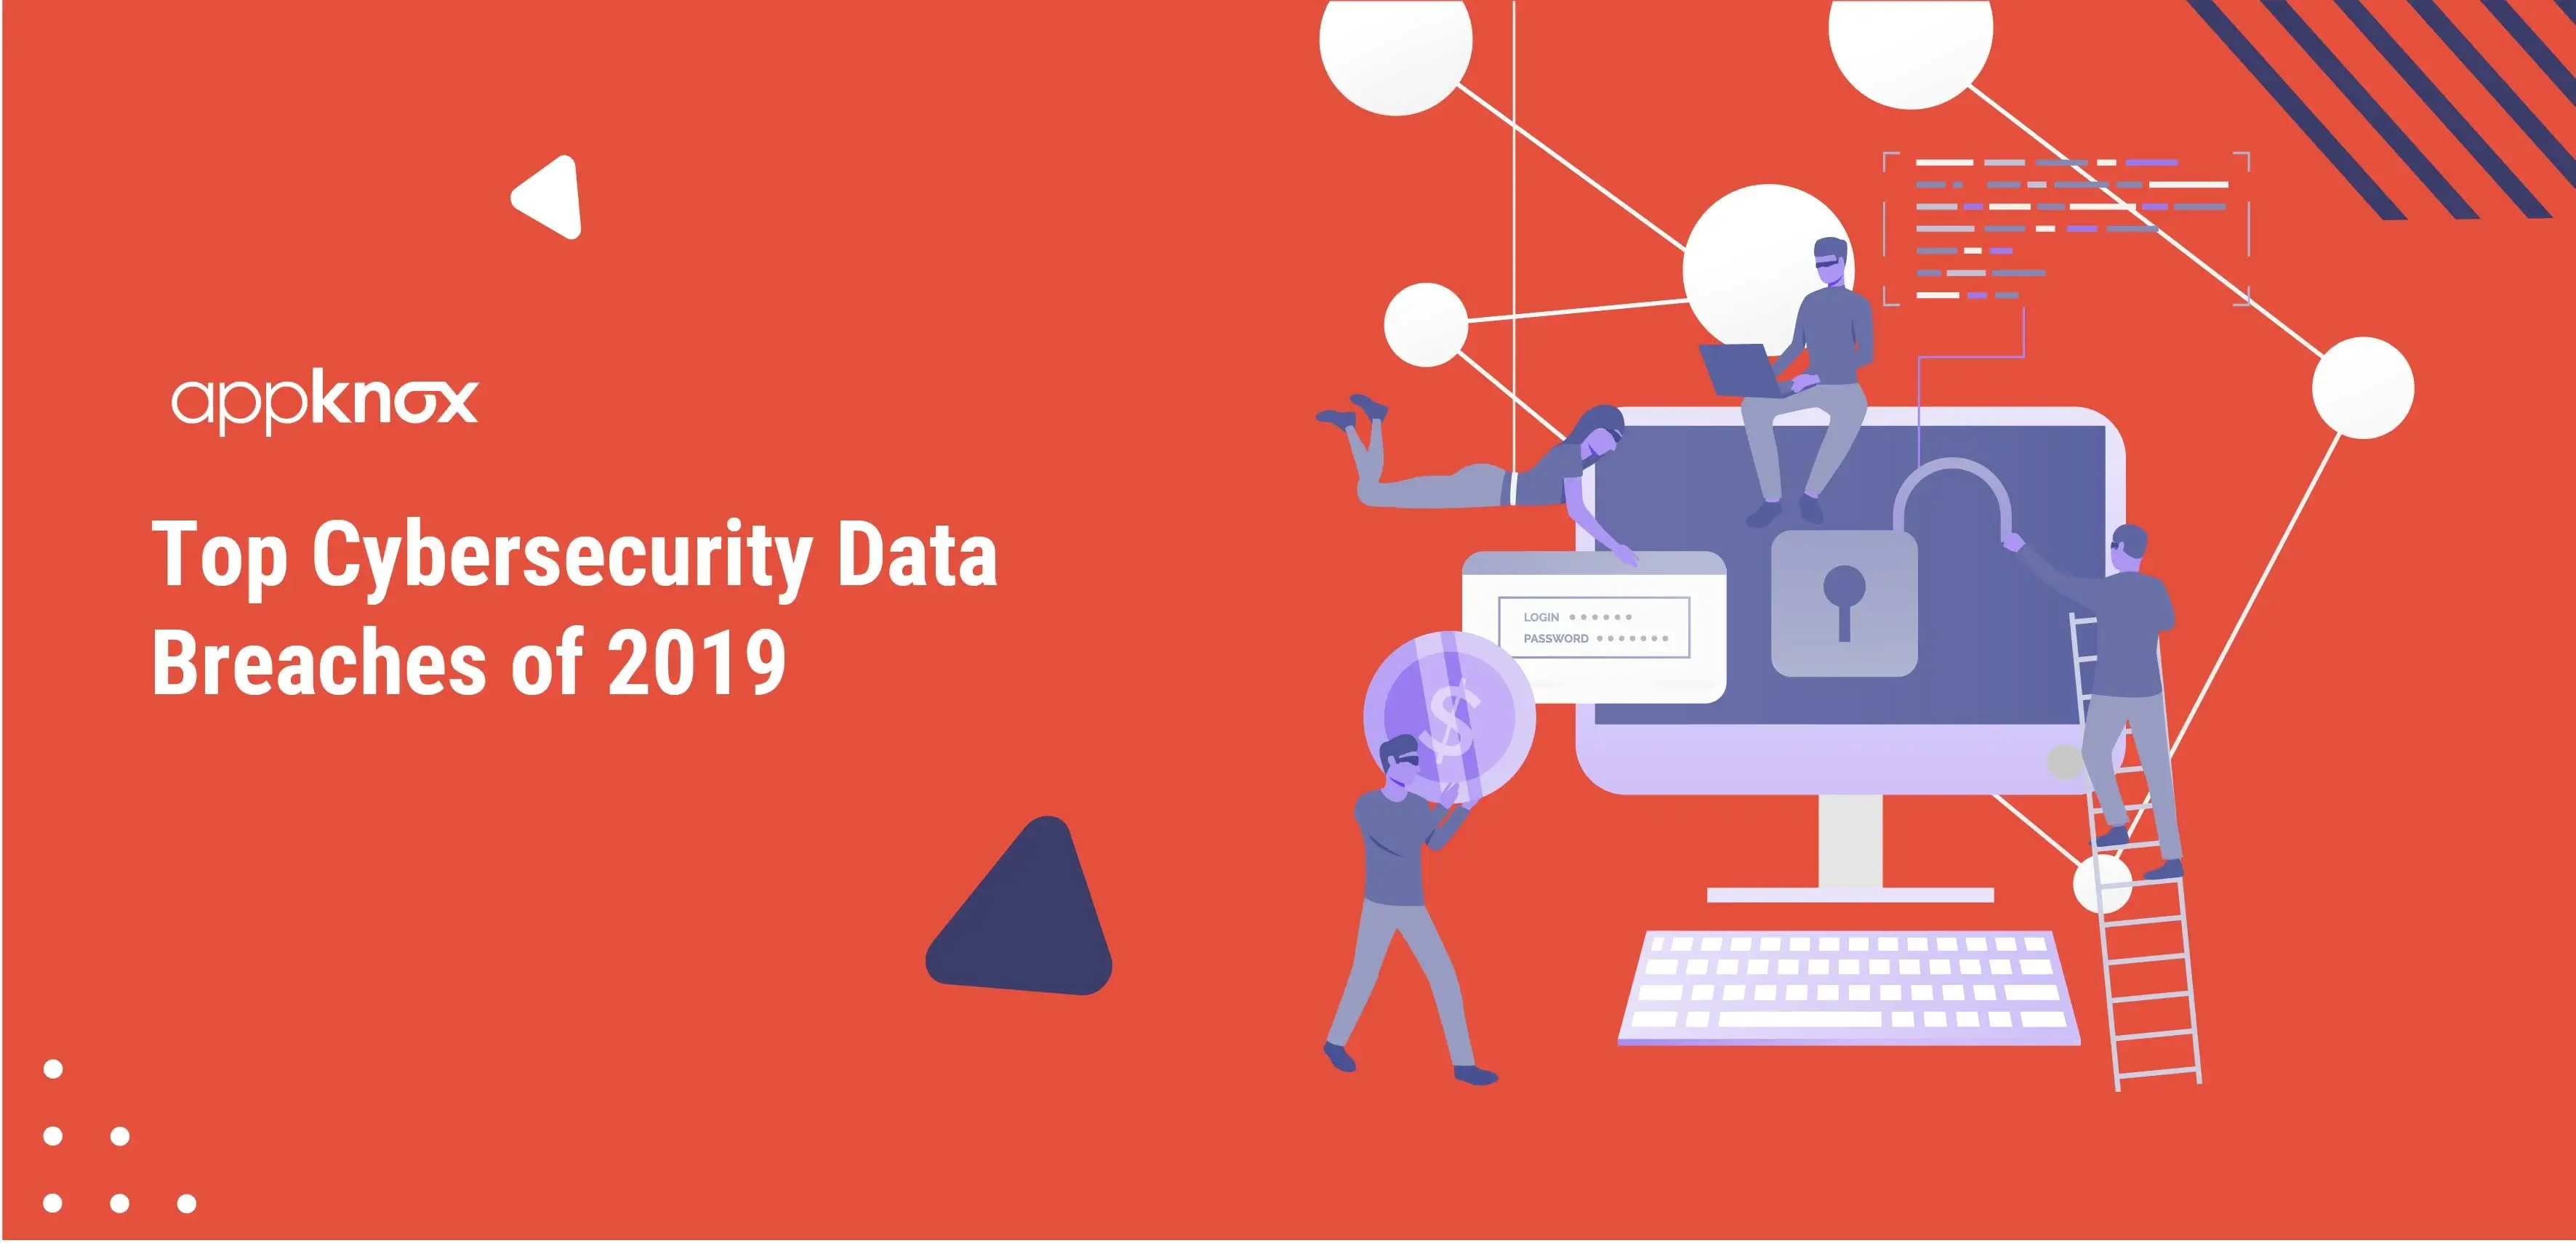 Top Cybersecurity Data Breaches of 2019